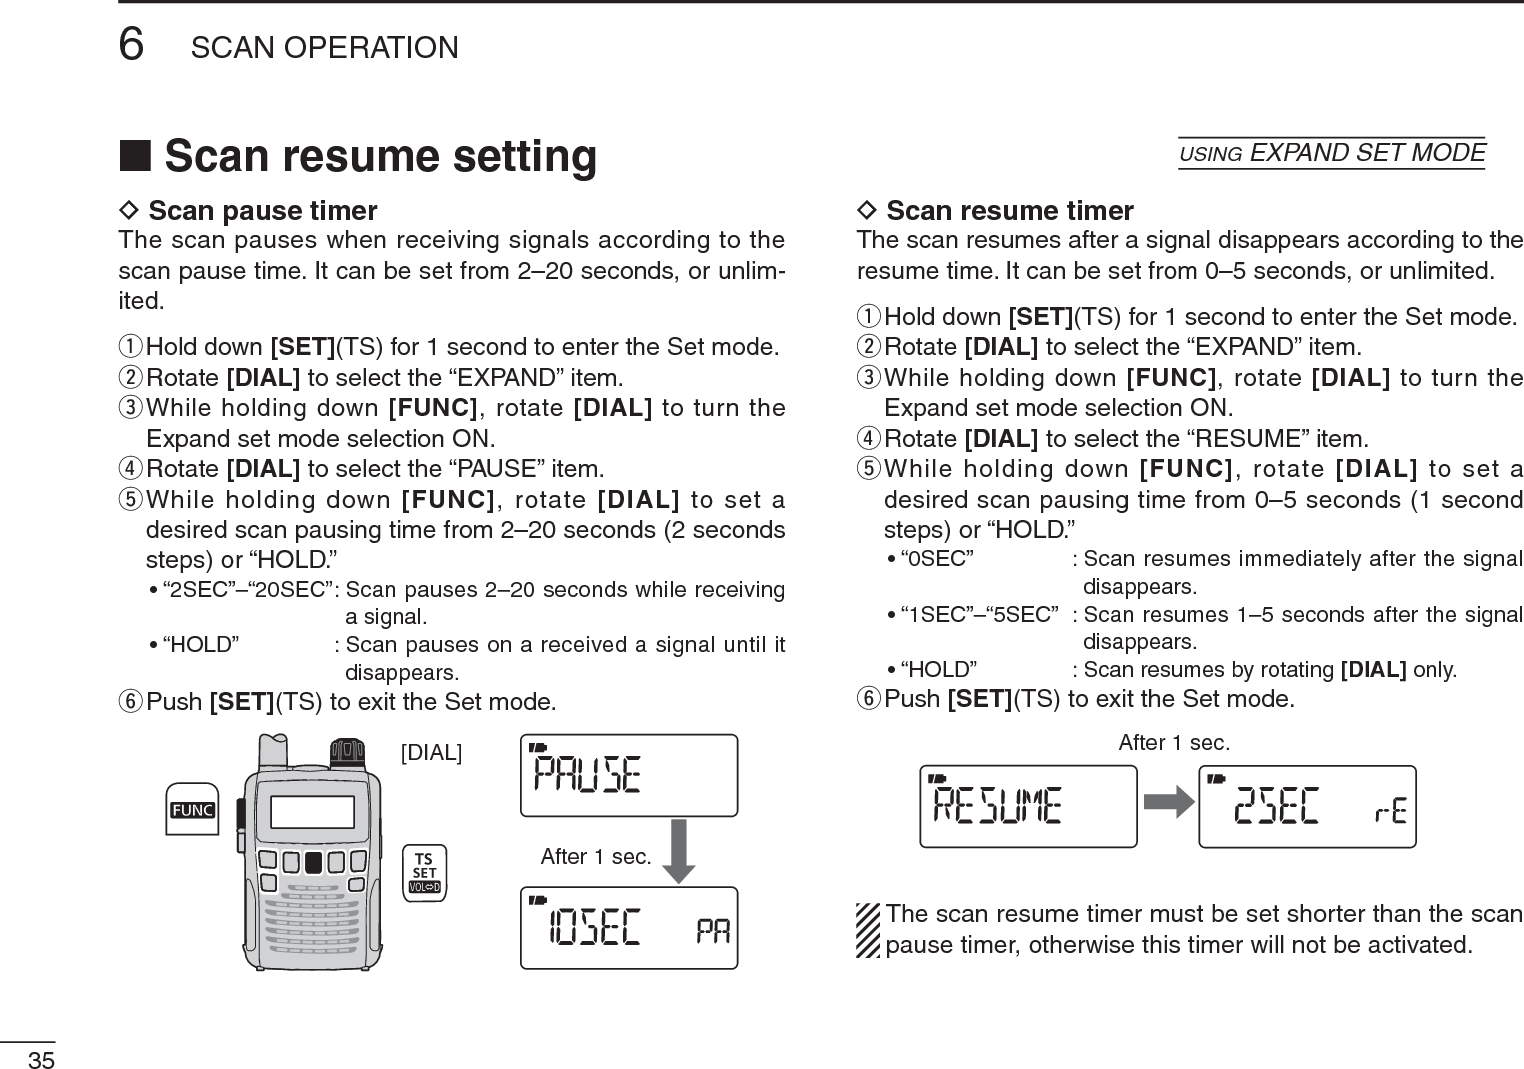 356SCAN OPERATIOND Scan pause timerThe scan pauses when receiving signals according to the scan pause time. It can be set from 2–20 seconds, or unlim-ited.qHold down [SET](TS) for 1 second to enter the Set mode.wRotate [DIAL] to select the “EXPAND” item.e  While holding down [FUNC], rotate [DIAL] to turn the Expand set mode selection ON.rRotate [DIAL] to select the “PAUSE” item.t  While holding down [FUNC], rotate [DIAL] to set a desired scan pausing time from 2–20 seconds (2 seconds steps) or “HOLD.”• “2SEC”–“20SEC”: Scan pauses 2–20 seconds while receiving a signal.• “HOLD” : Scan pauses on a received a signal until it disappears.yPush [SET](TS) to exit the Set mode.[DIAL]After 1 sec.D Scan resume timerThe scan resumes after a signal disappears according to the resume time. It can be set from 0–5 seconds, or unlimited.qHold down [SET](TS) for 1 second to enter the Set mode.wRotate [DIAL] to select the “EXPAND” item.e  While holding down [FUNC], rotate [DIAL] to turn the Expand set mode selection ON.rRotate [DIAL] to select the “RESUME” item.t  While holding down [FUNC], rotate [DIAL] to set a desired scan pausing time from 0–5 seconds (1 second steps) or “HOLD.”• “0SEC” : Scan resumes immediately after the signal disappears.• “1SEC”–“5SEC” : Scan resumes 1–5 seconds after the signal disappears.• “HOLD” : Scan resumes by rotating [DIAL] only.yPush [SET](TS) to exit the Set mode.After 1 sec.The scan resume timer must be set shorter than the scan pause timer, otherwise this timer will not be activated.N Scan resume setting    USING EXPAND SET MODE